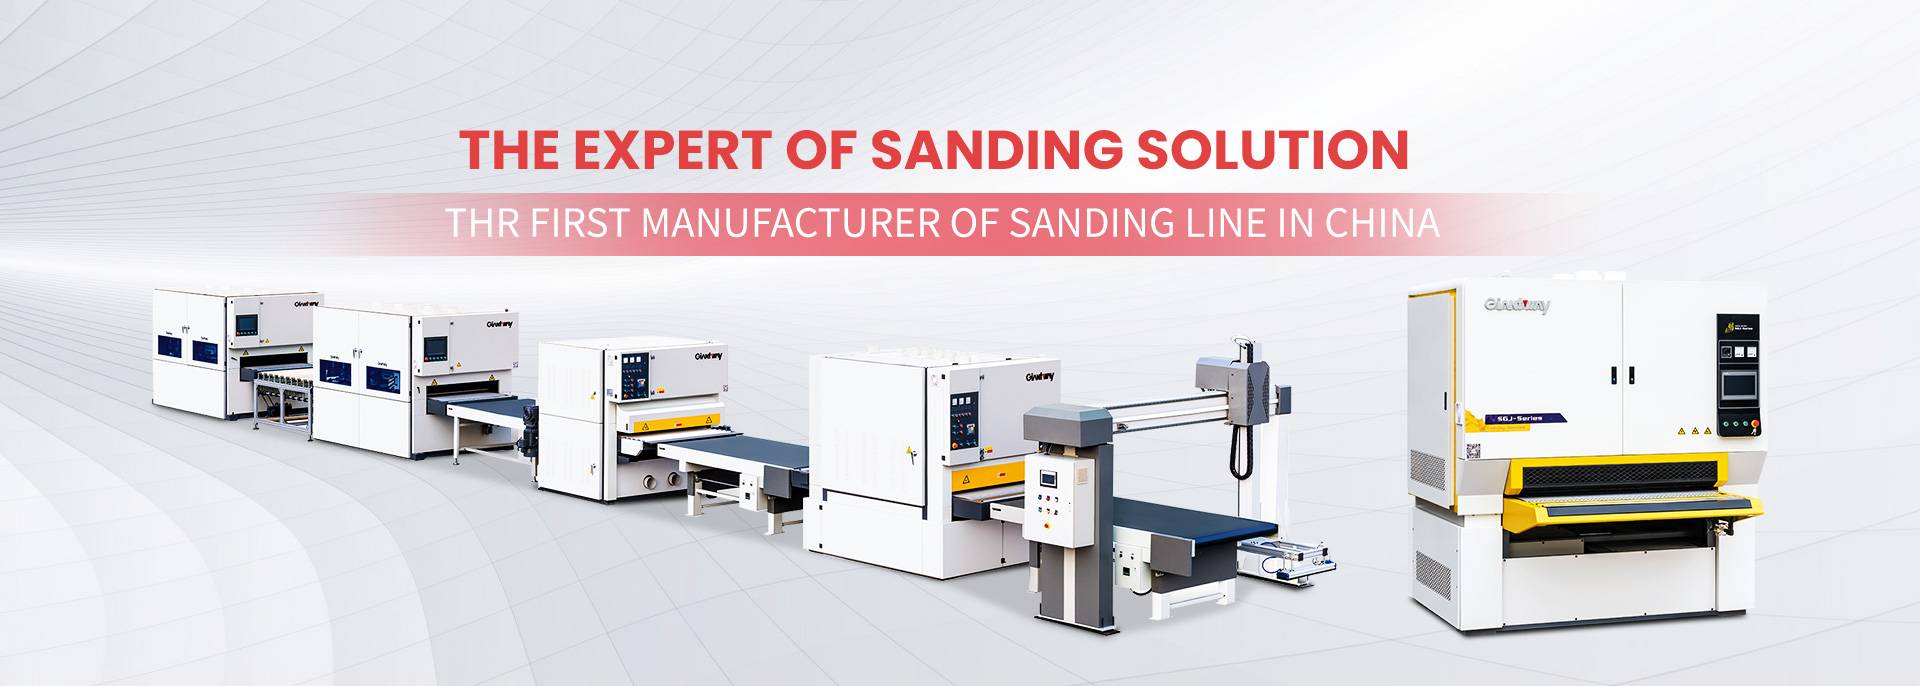 THE EXPERT OF SANDING SOLUTION THR FIRST MANUFACTURER OF SANDING LINE IN CHINA 